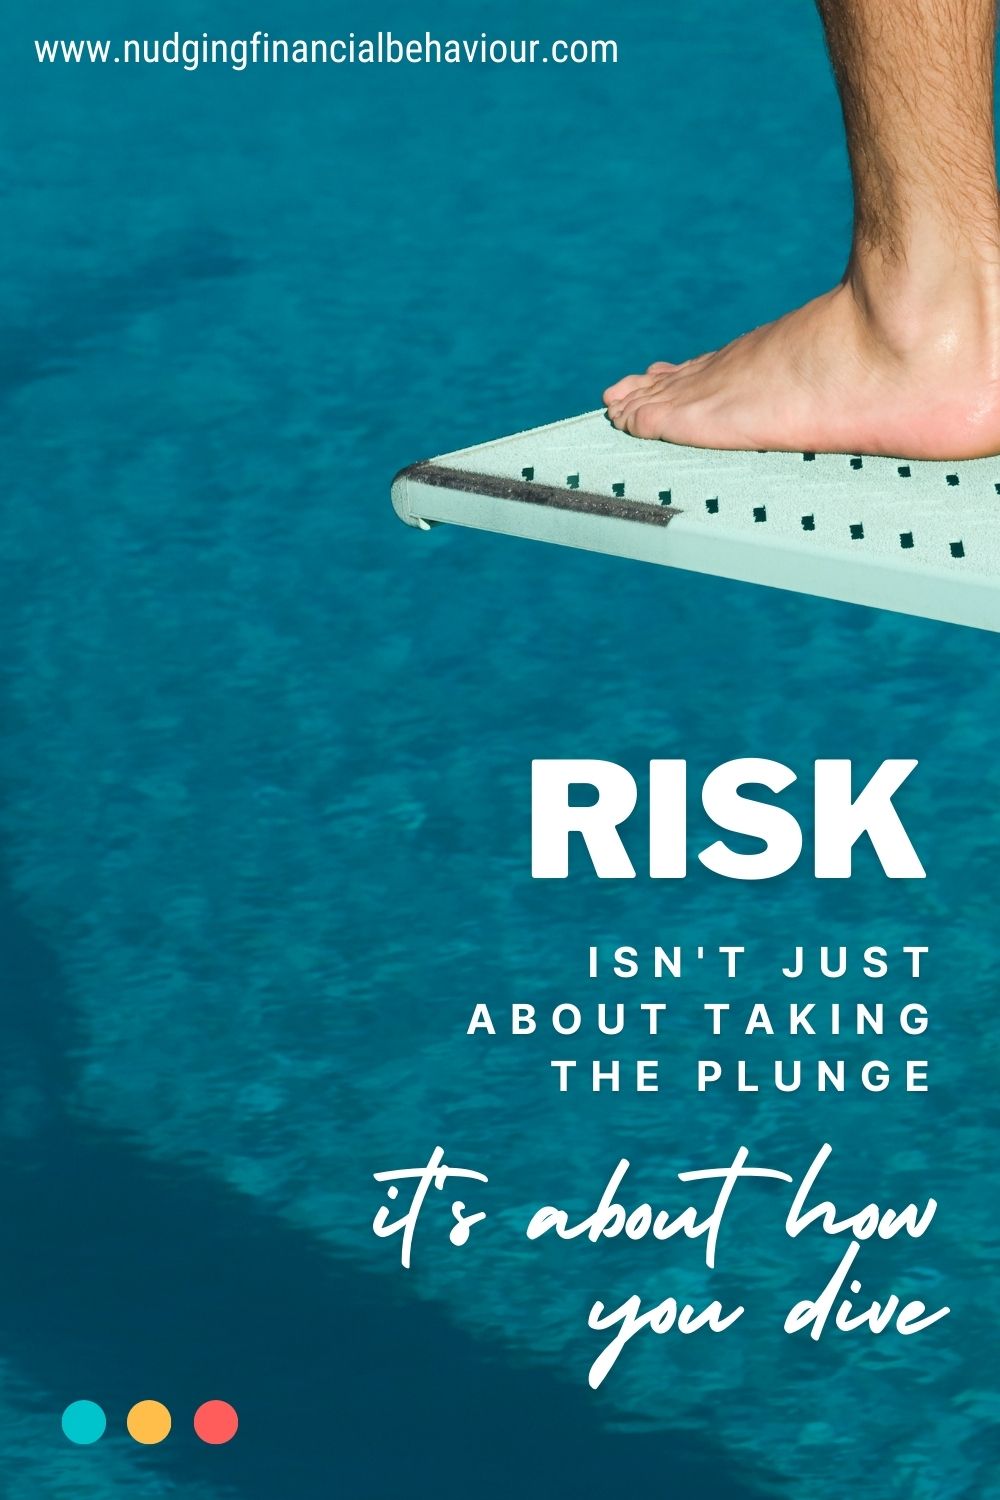 How to manage risk